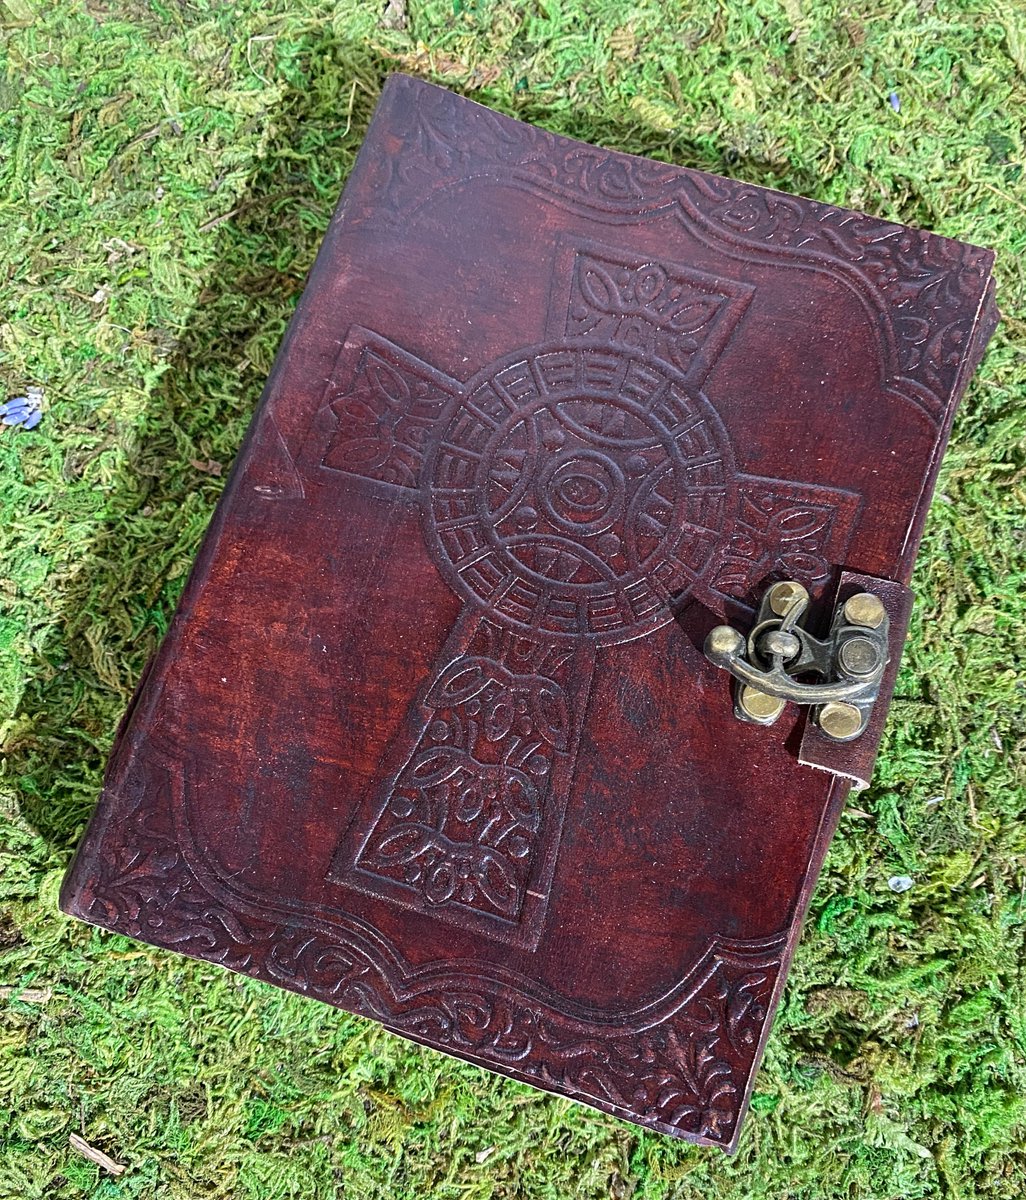 Excited to share the latest addition to my #etsy shop: Celtic Cross Leather NotebookJournal 17 cm x 12 cm (approximately 6.5 inches x 4.5 inches) with Closing Clasp etsy.me/45Qk4ez #leatherjournal #journal #bookofshadows #celticcross #grimoire #notebook #leathe